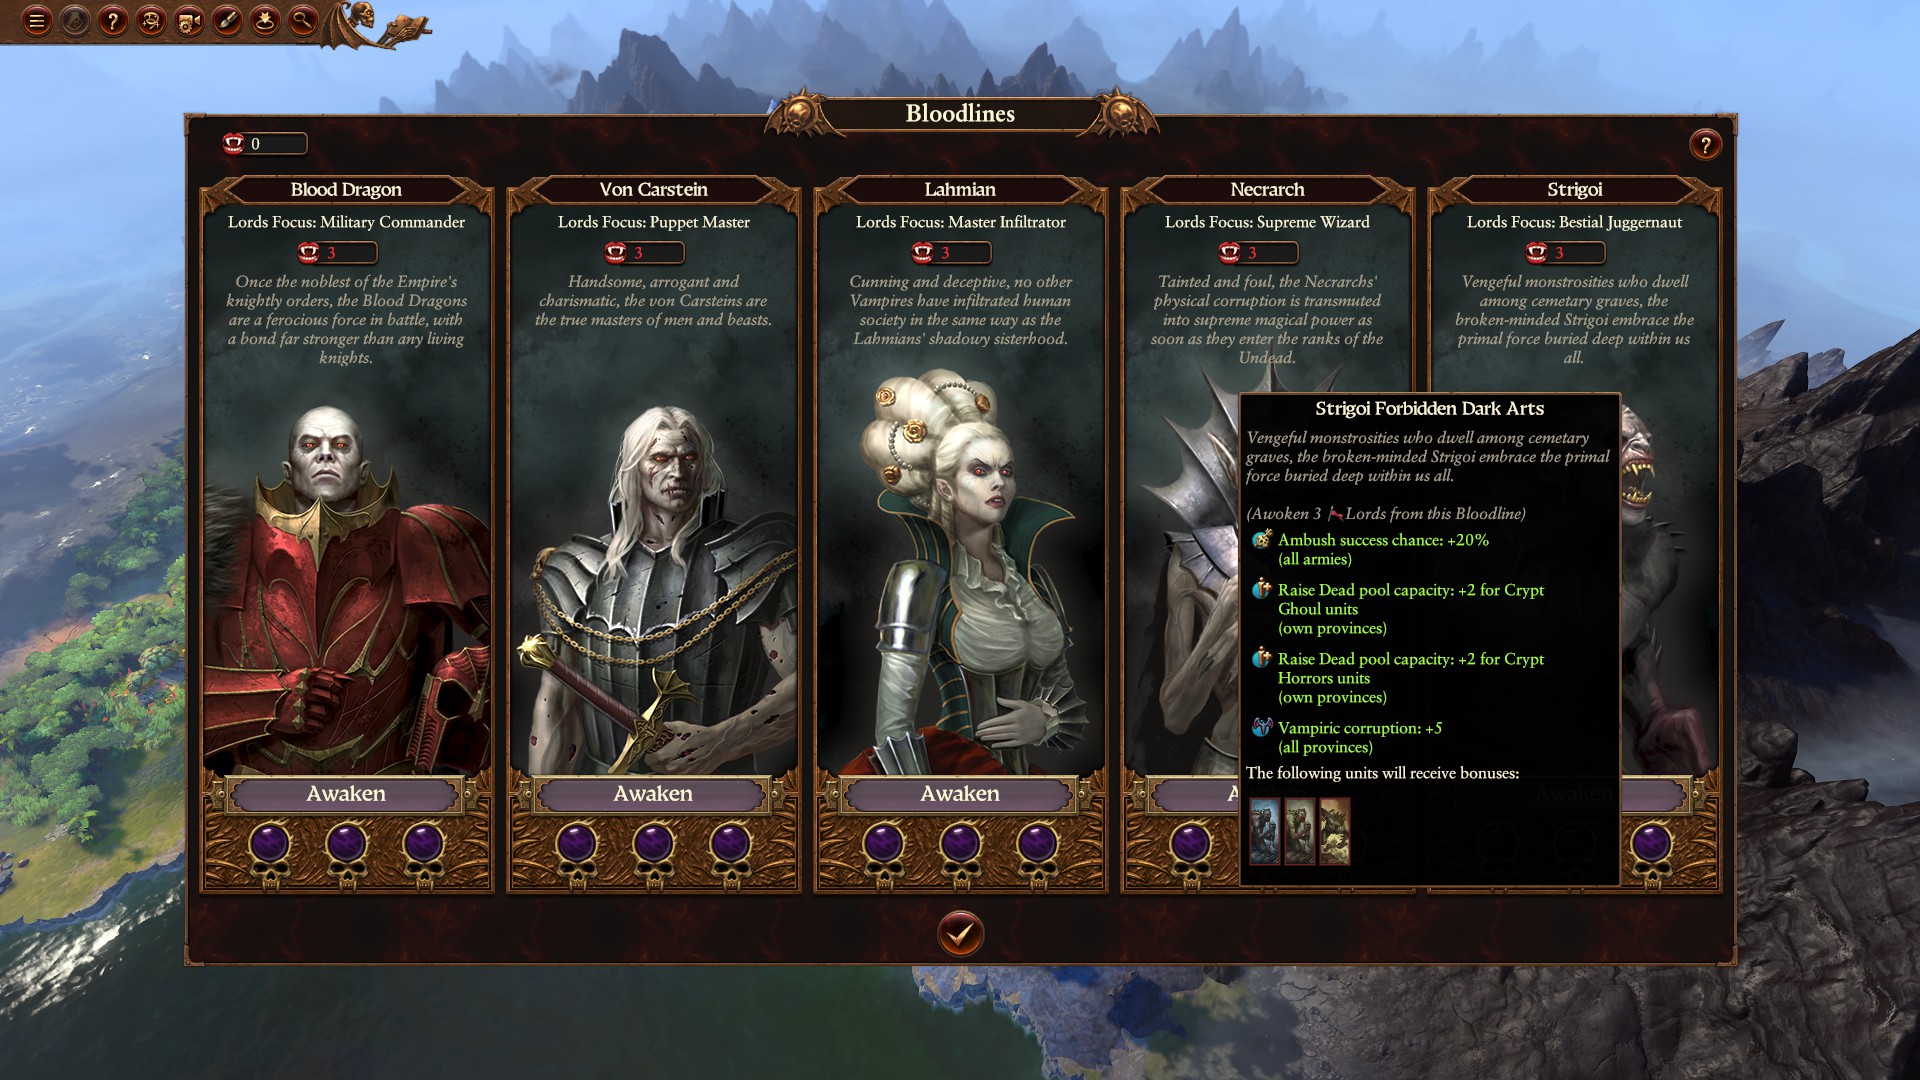 Total War: Warhammer 3 Immortal Empires Helman Ghorst - Vampire Counts campaign overview, guide and second thoughts image 5